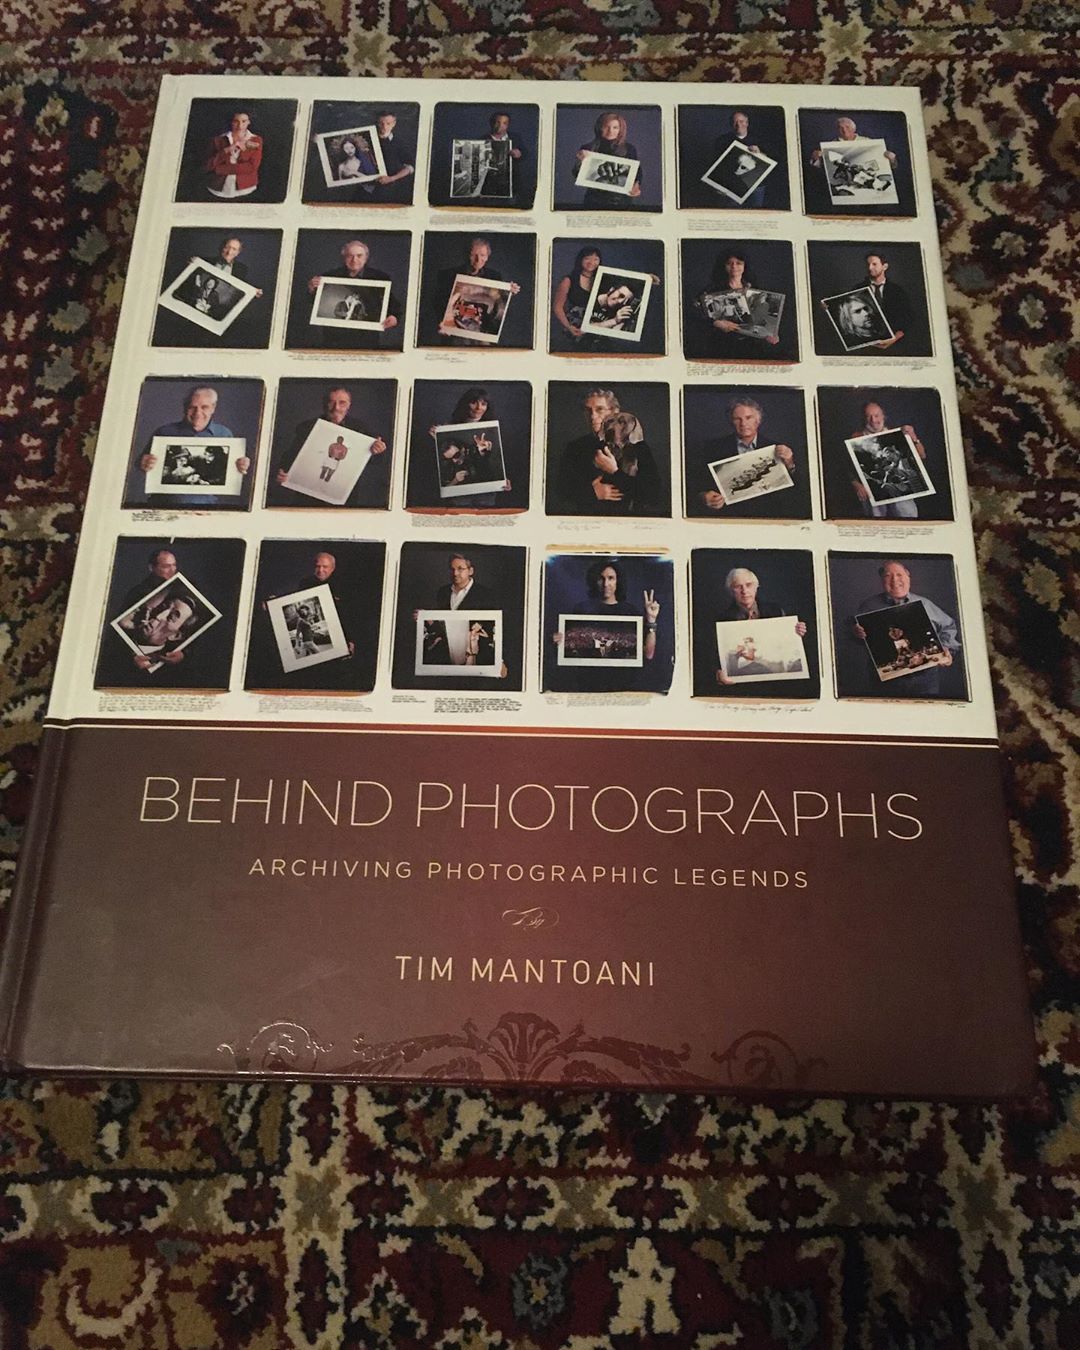 Stoked to get this amazing book in the mail – Tim Mantoani, Behind Photographs. And rad to see some familiar faces in it, like @jgrantbrittain @timmantoani